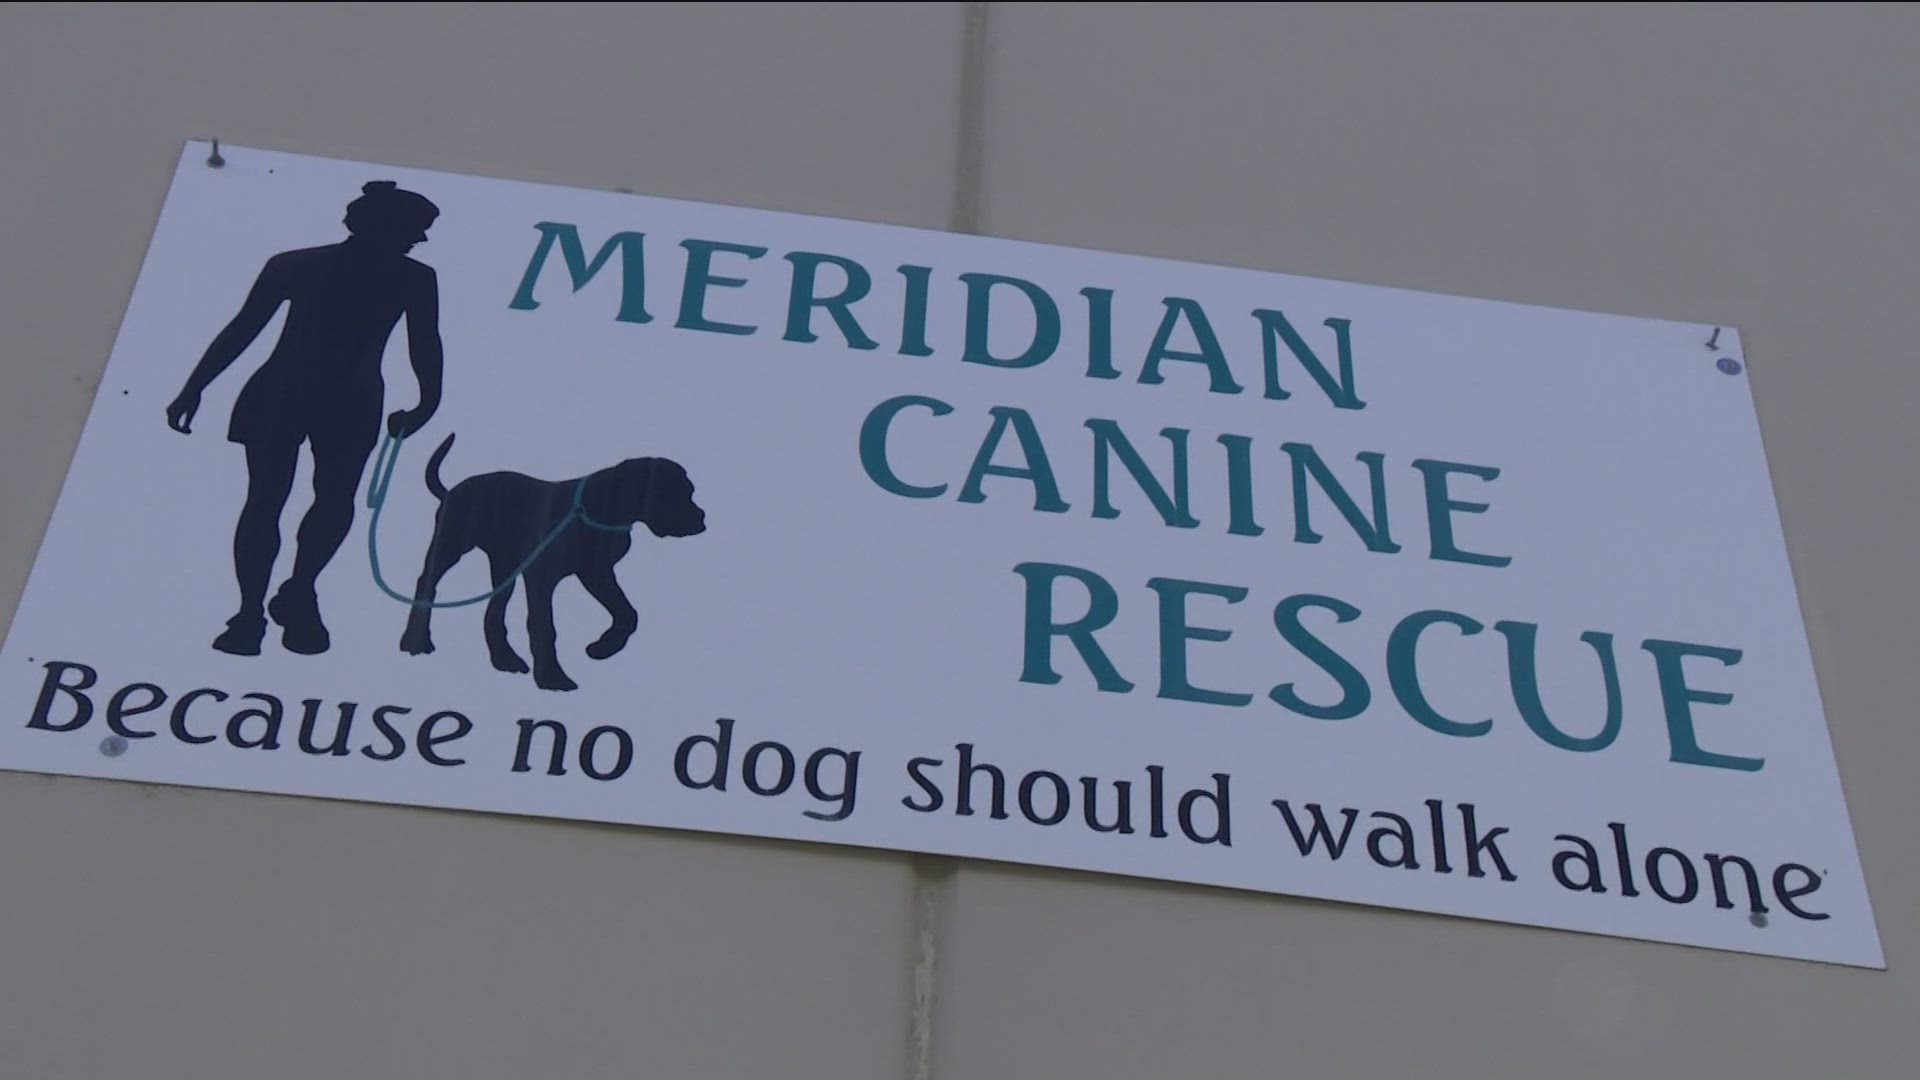 Meridian Canine Rescue said its new location in Emmett is on more than 15 acres and allows the shelter to expand its capacity by 30%.